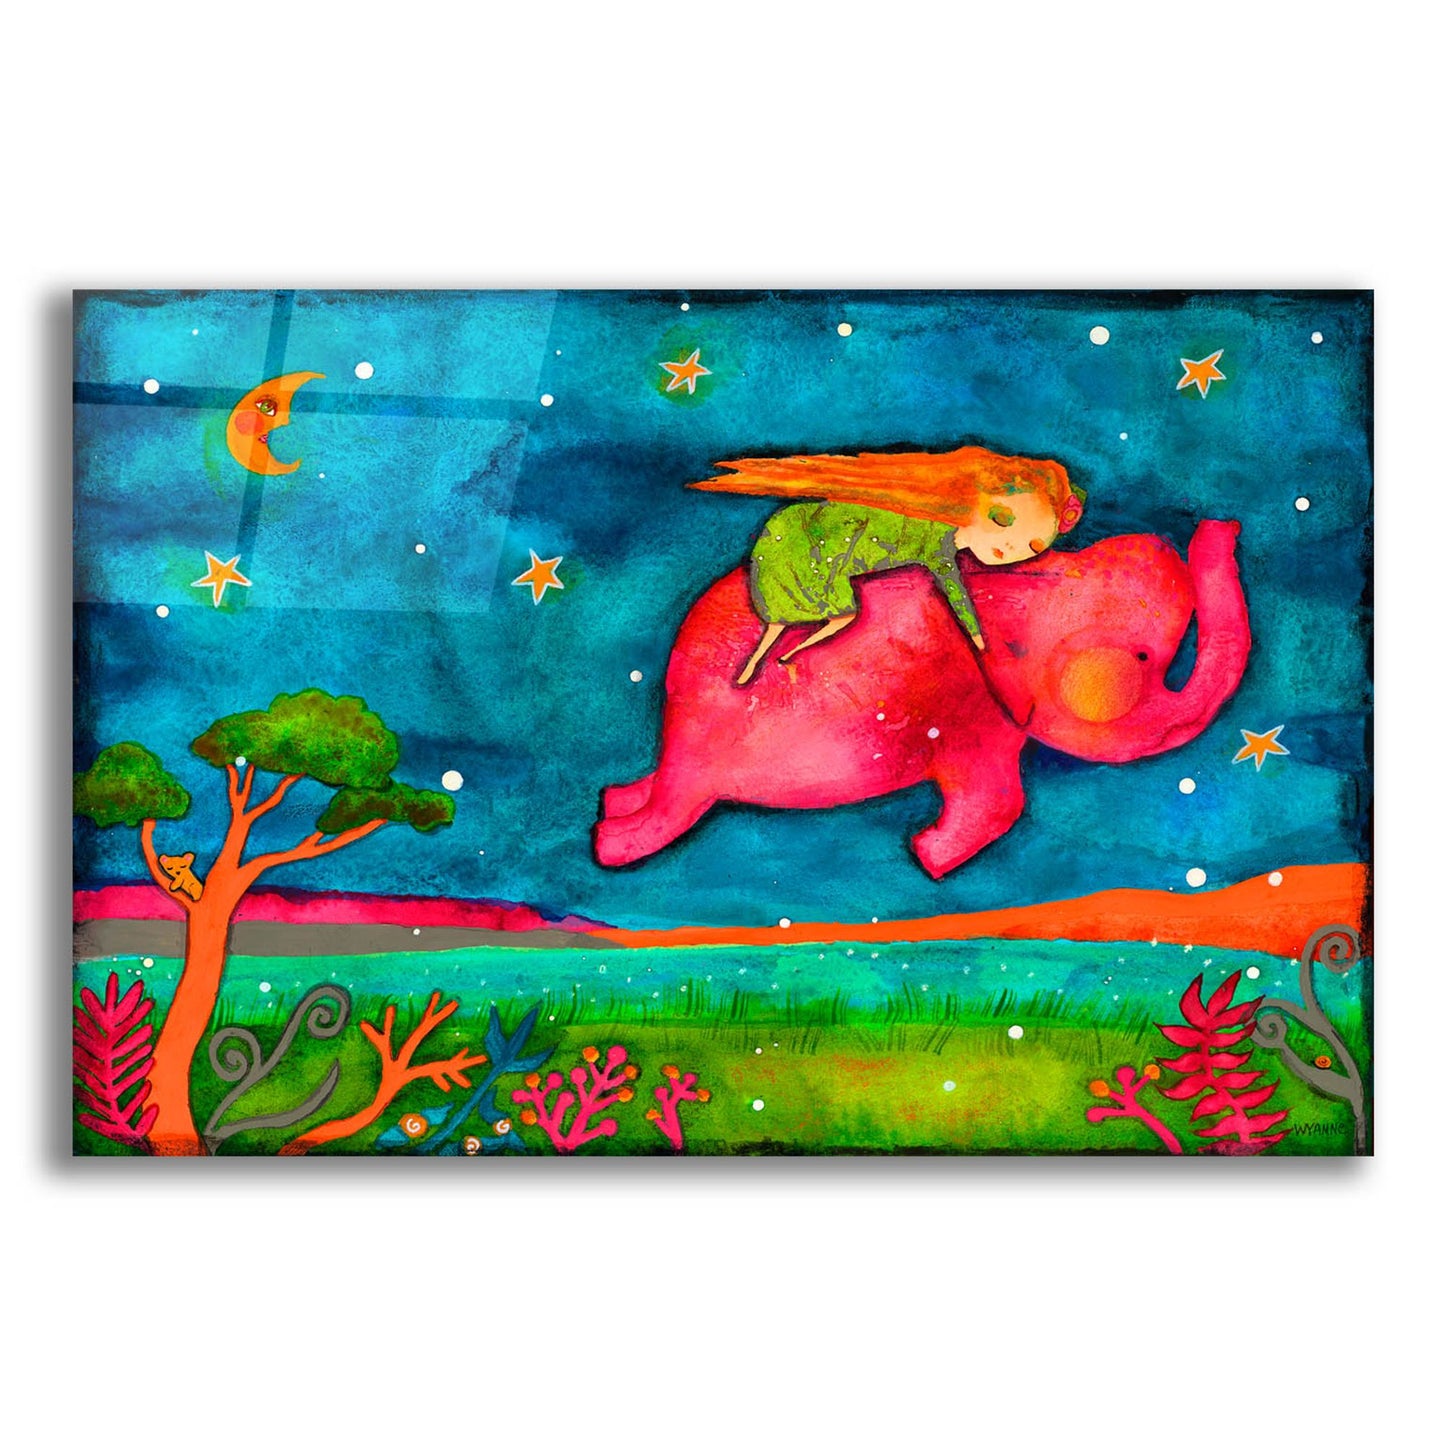 Epic Art 'Come Dream With Me' by Wyanne, Acrylic Glass Wall Art